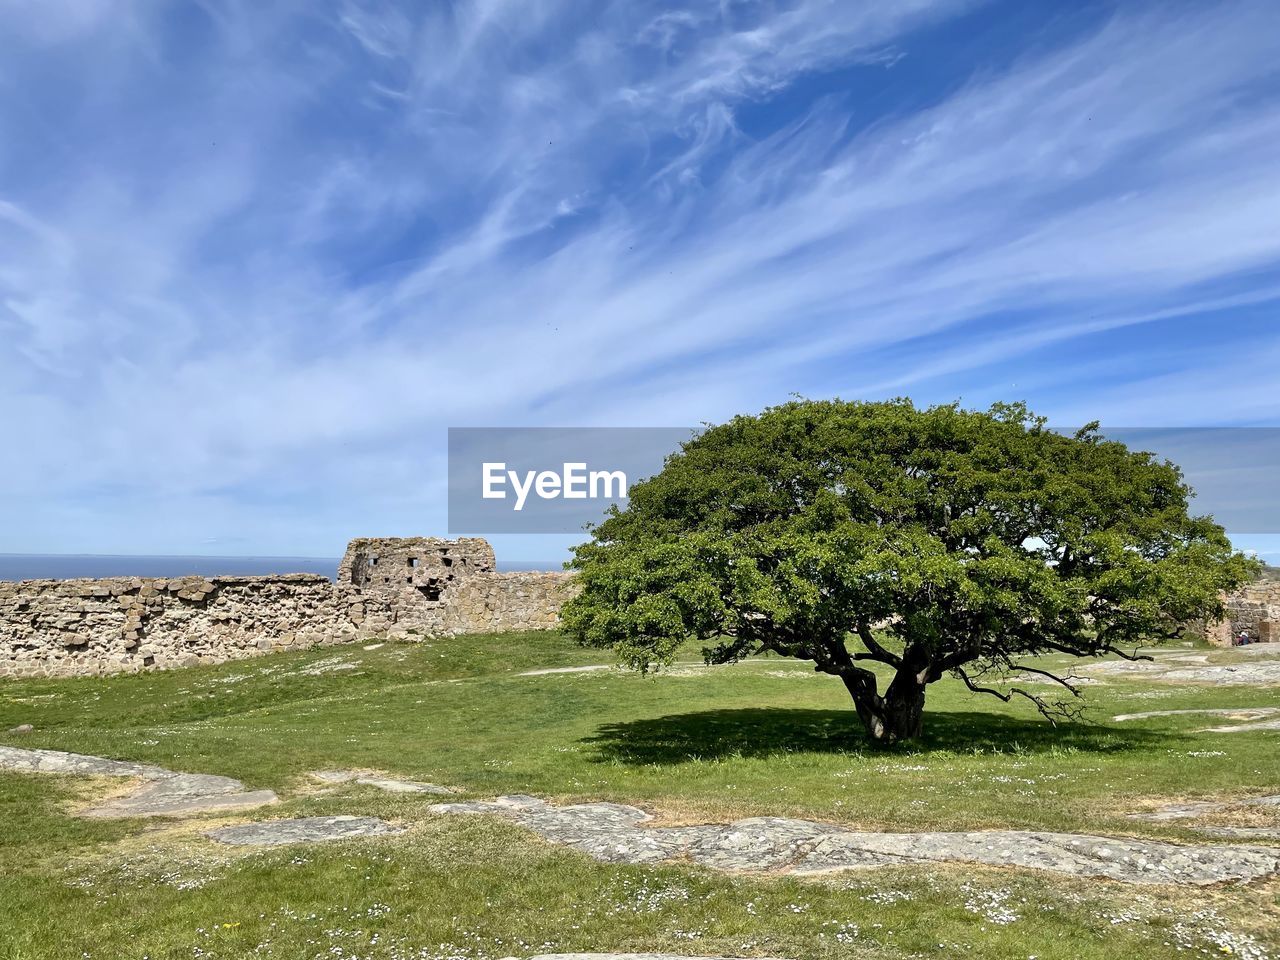 sky, plant, tree, landscape, nature, history, architecture, cloud, grass, land, environment, hill, the past, scenics - nature, ancient, no people, rural area, travel destinations, beauty in nature, old ruin, field, built structure, travel, blue, outdoors, non-urban scene, tranquility, green, building, tourism, tranquil scene, rural scene, horizon, ruins, day, wall, sea, rock, old